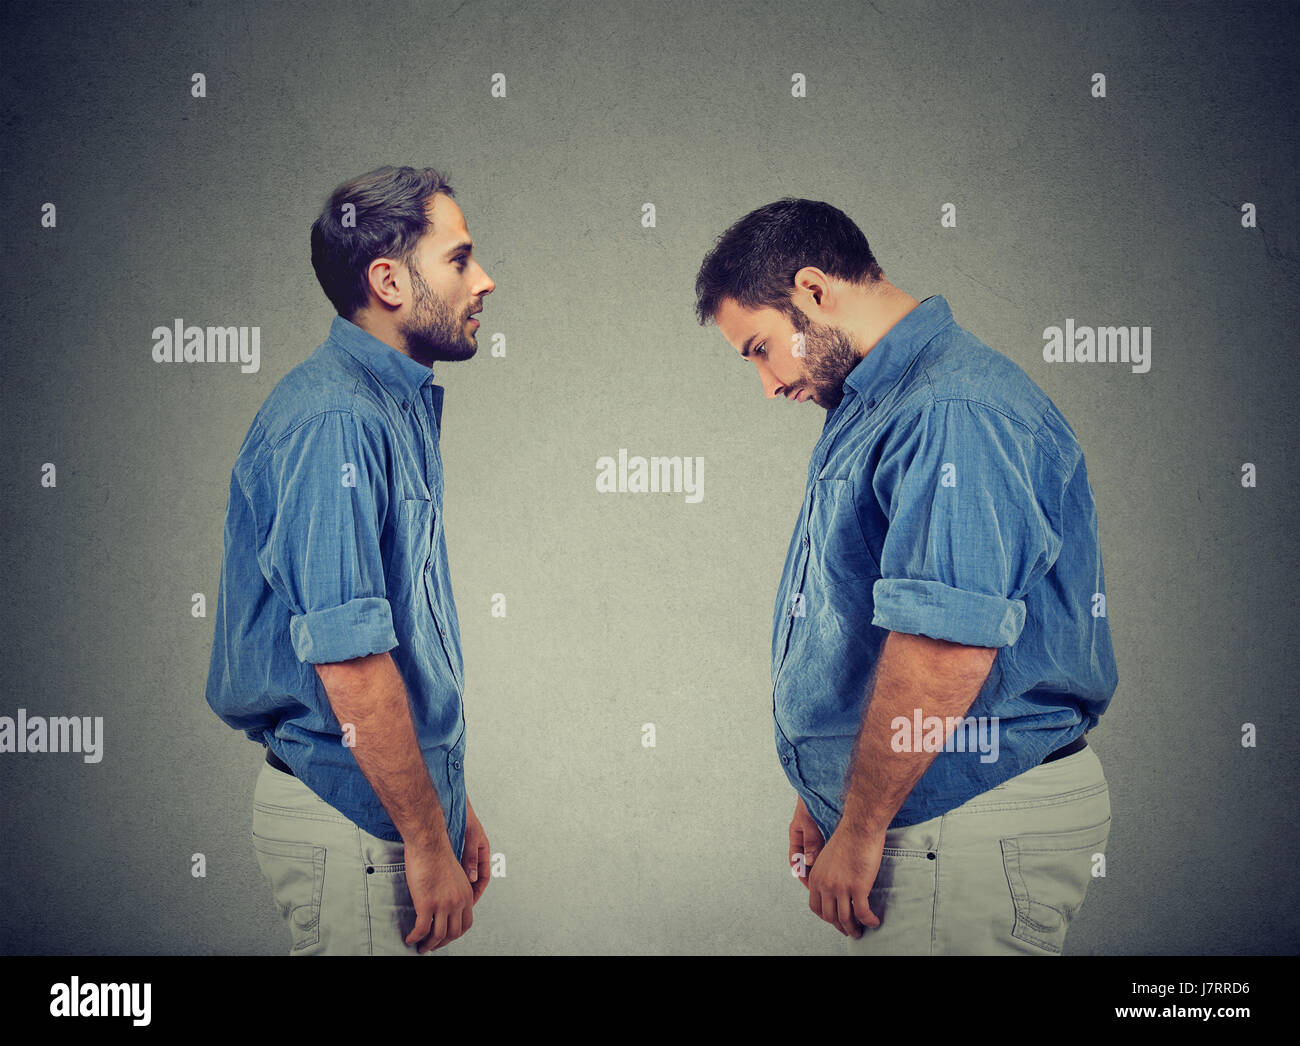 Slim guy looking at fat man himself. Diet choice right nutrition healthy lifestyle concept Stock Photo